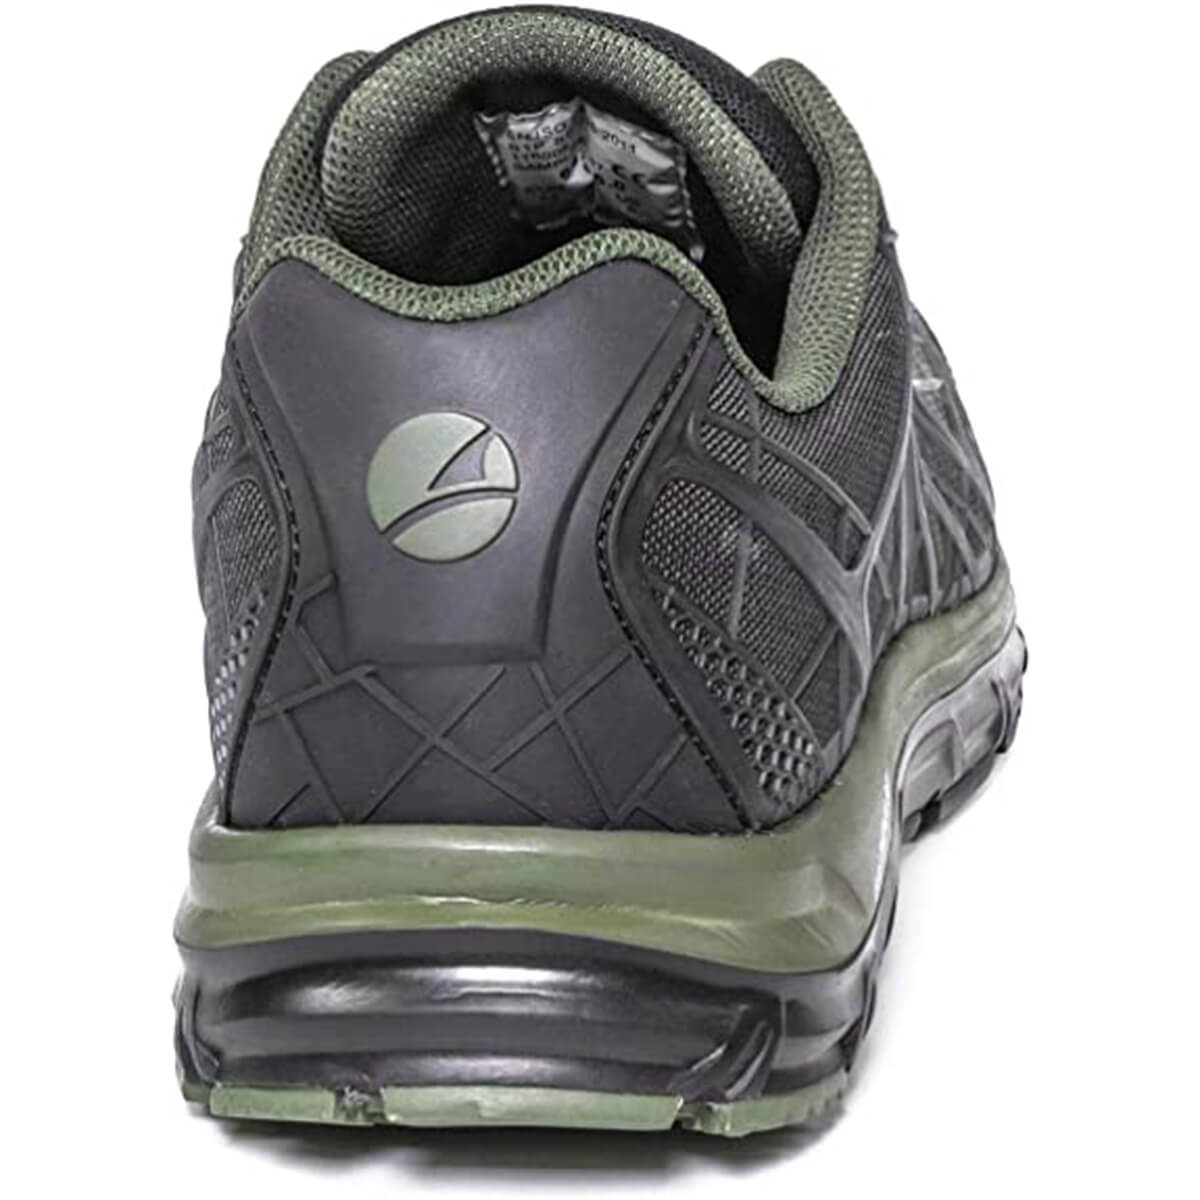 Albatros Energy Impulse Olive Low Safety Trainers - Shoe Store Direct